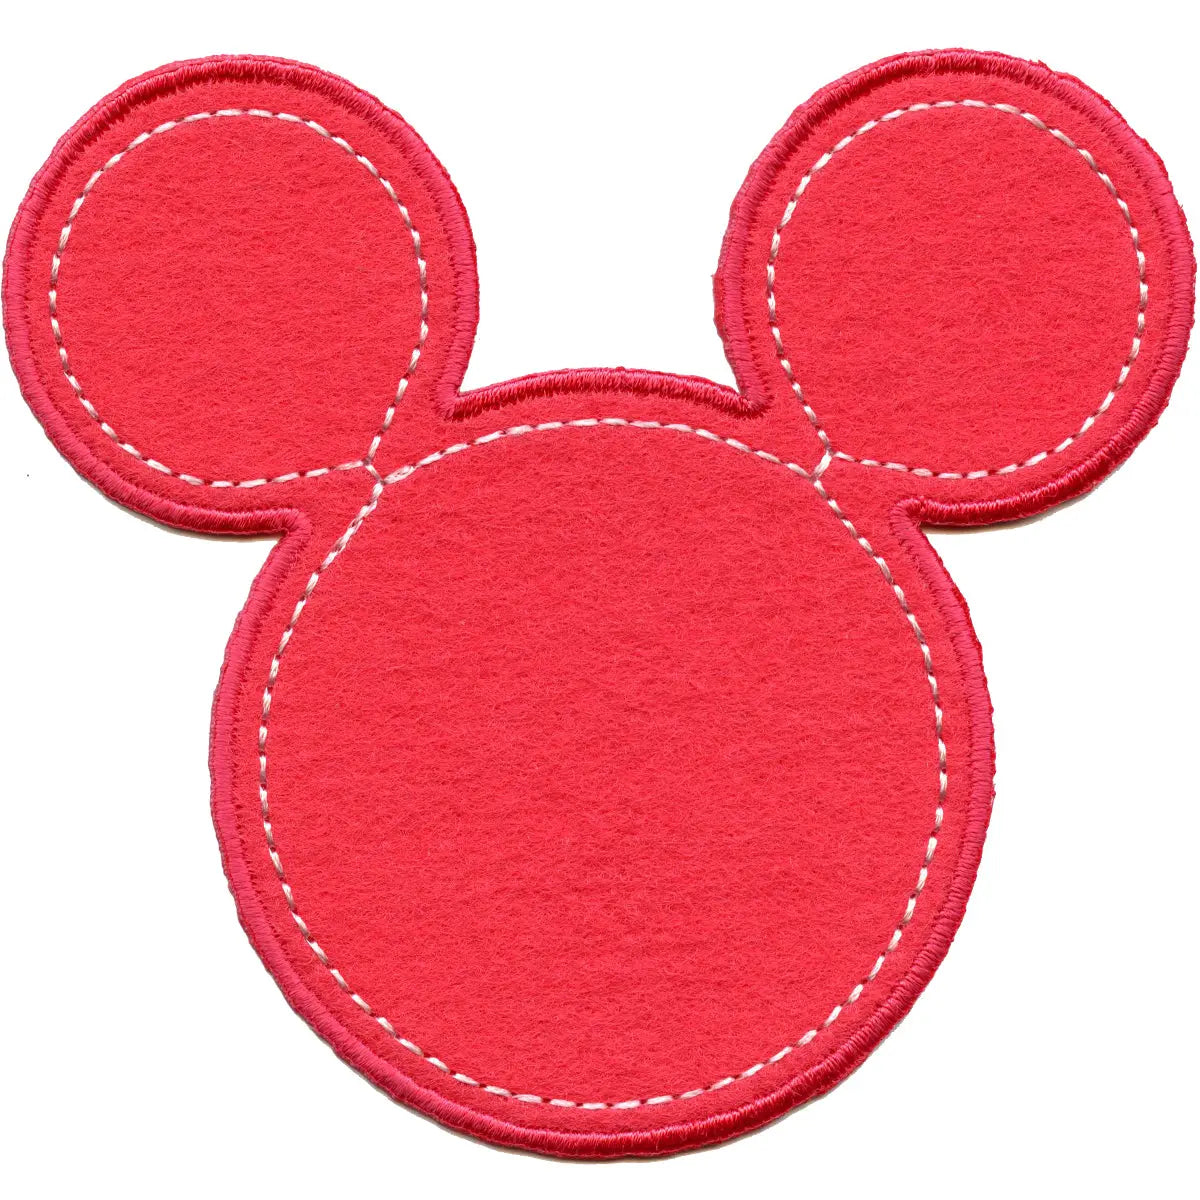 HUGE Minnie Mouse Iron on Patch Disney  Minnie, Minnie mouse, Iron on  patches